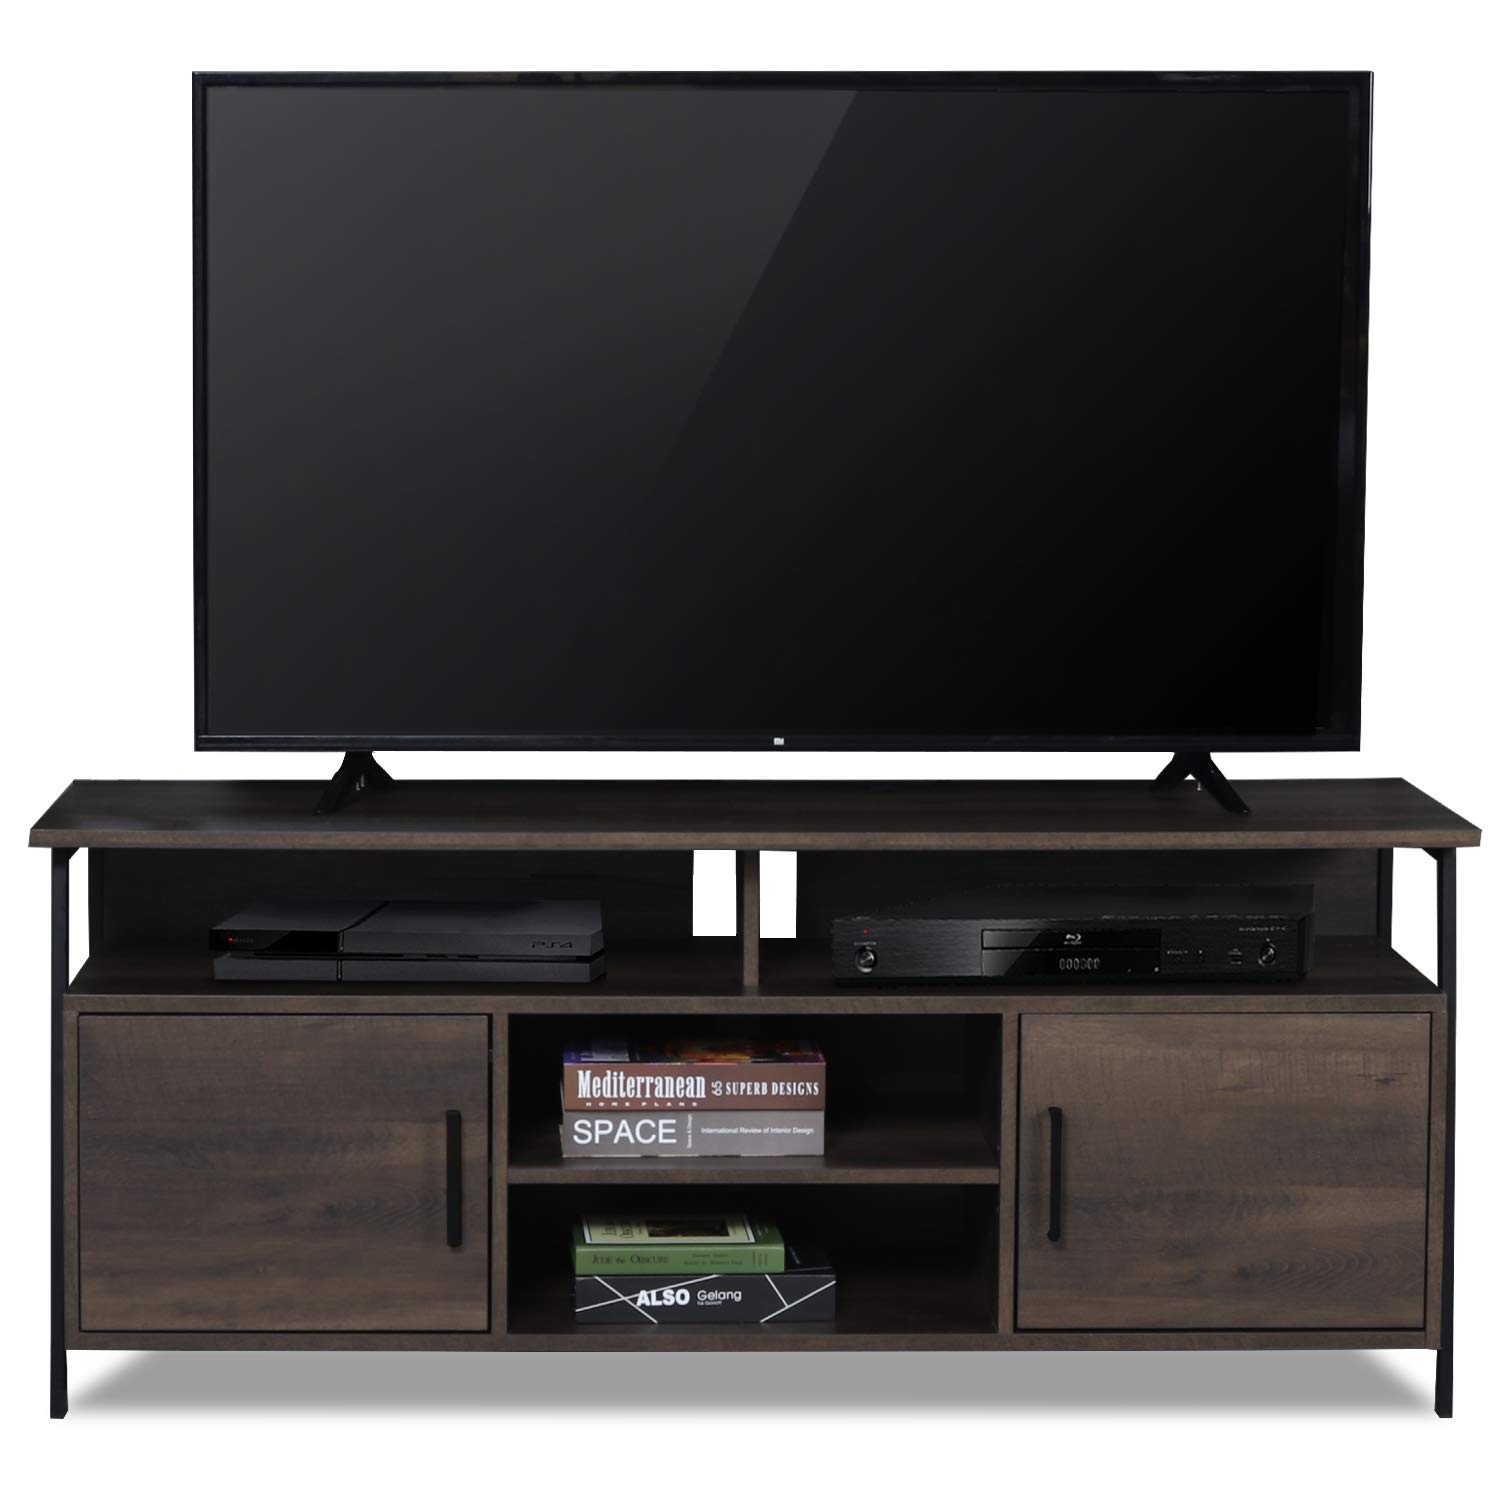 TV STAND Media Center CONSOLE 50 Entertainment Storage Home Theater Wood Cabinet 